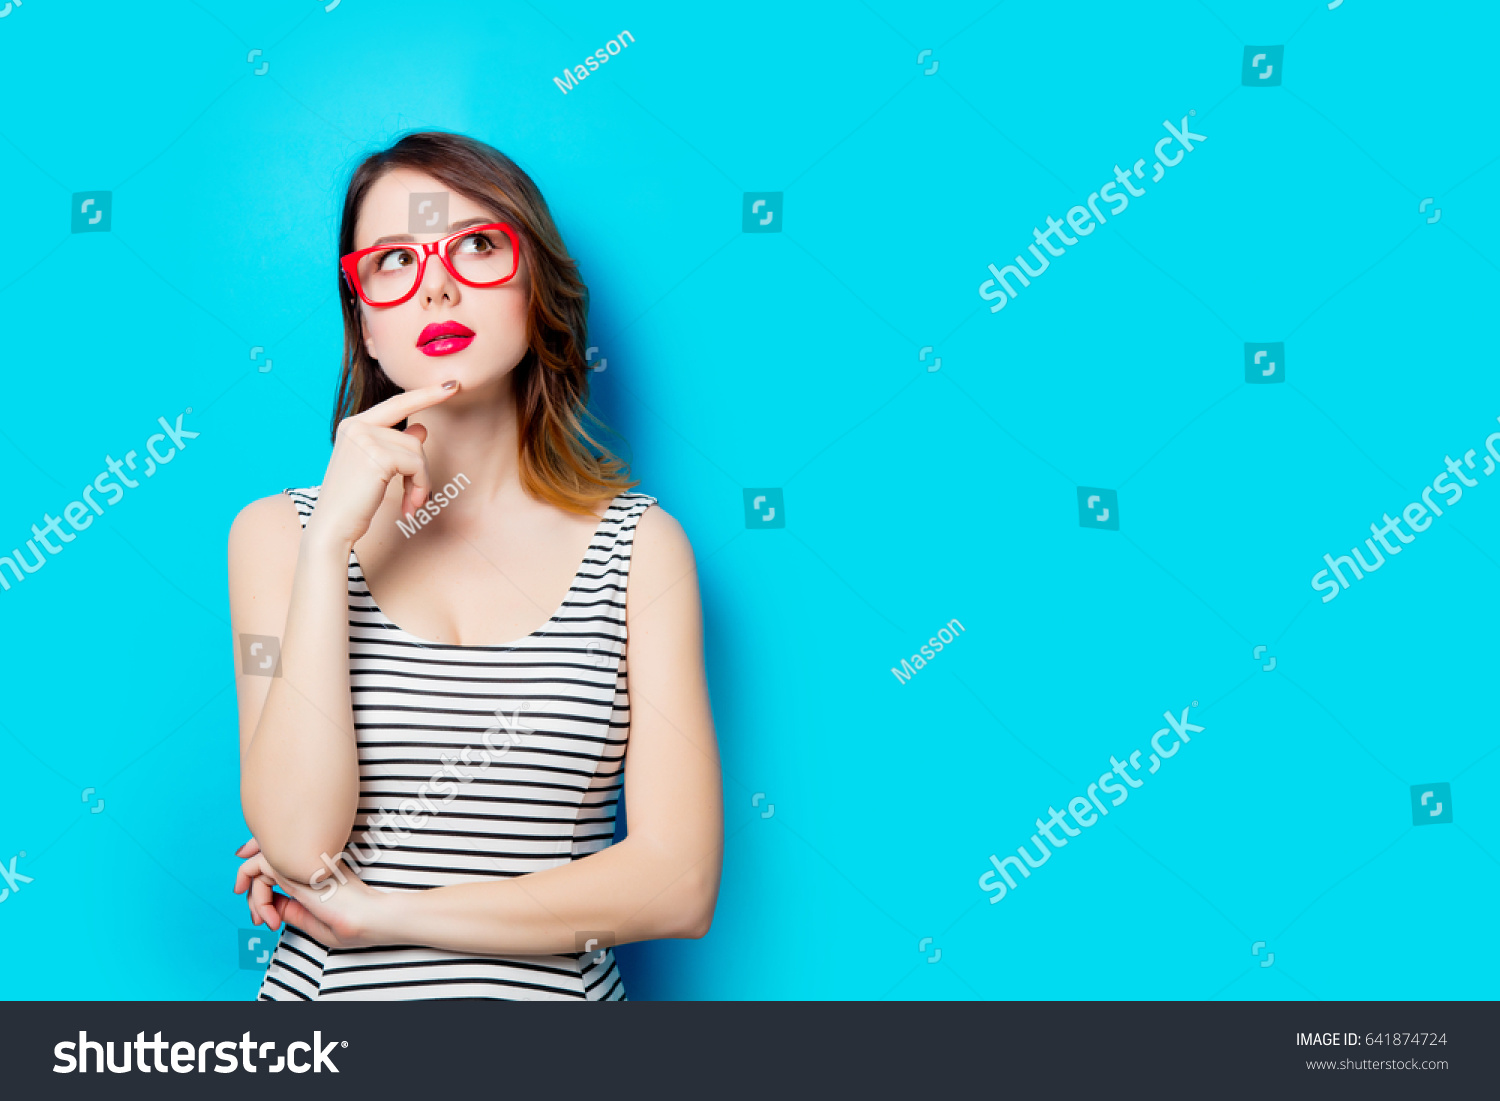 portrait of beautiful young woman in glasses on the wonderful blue studio background #641874724